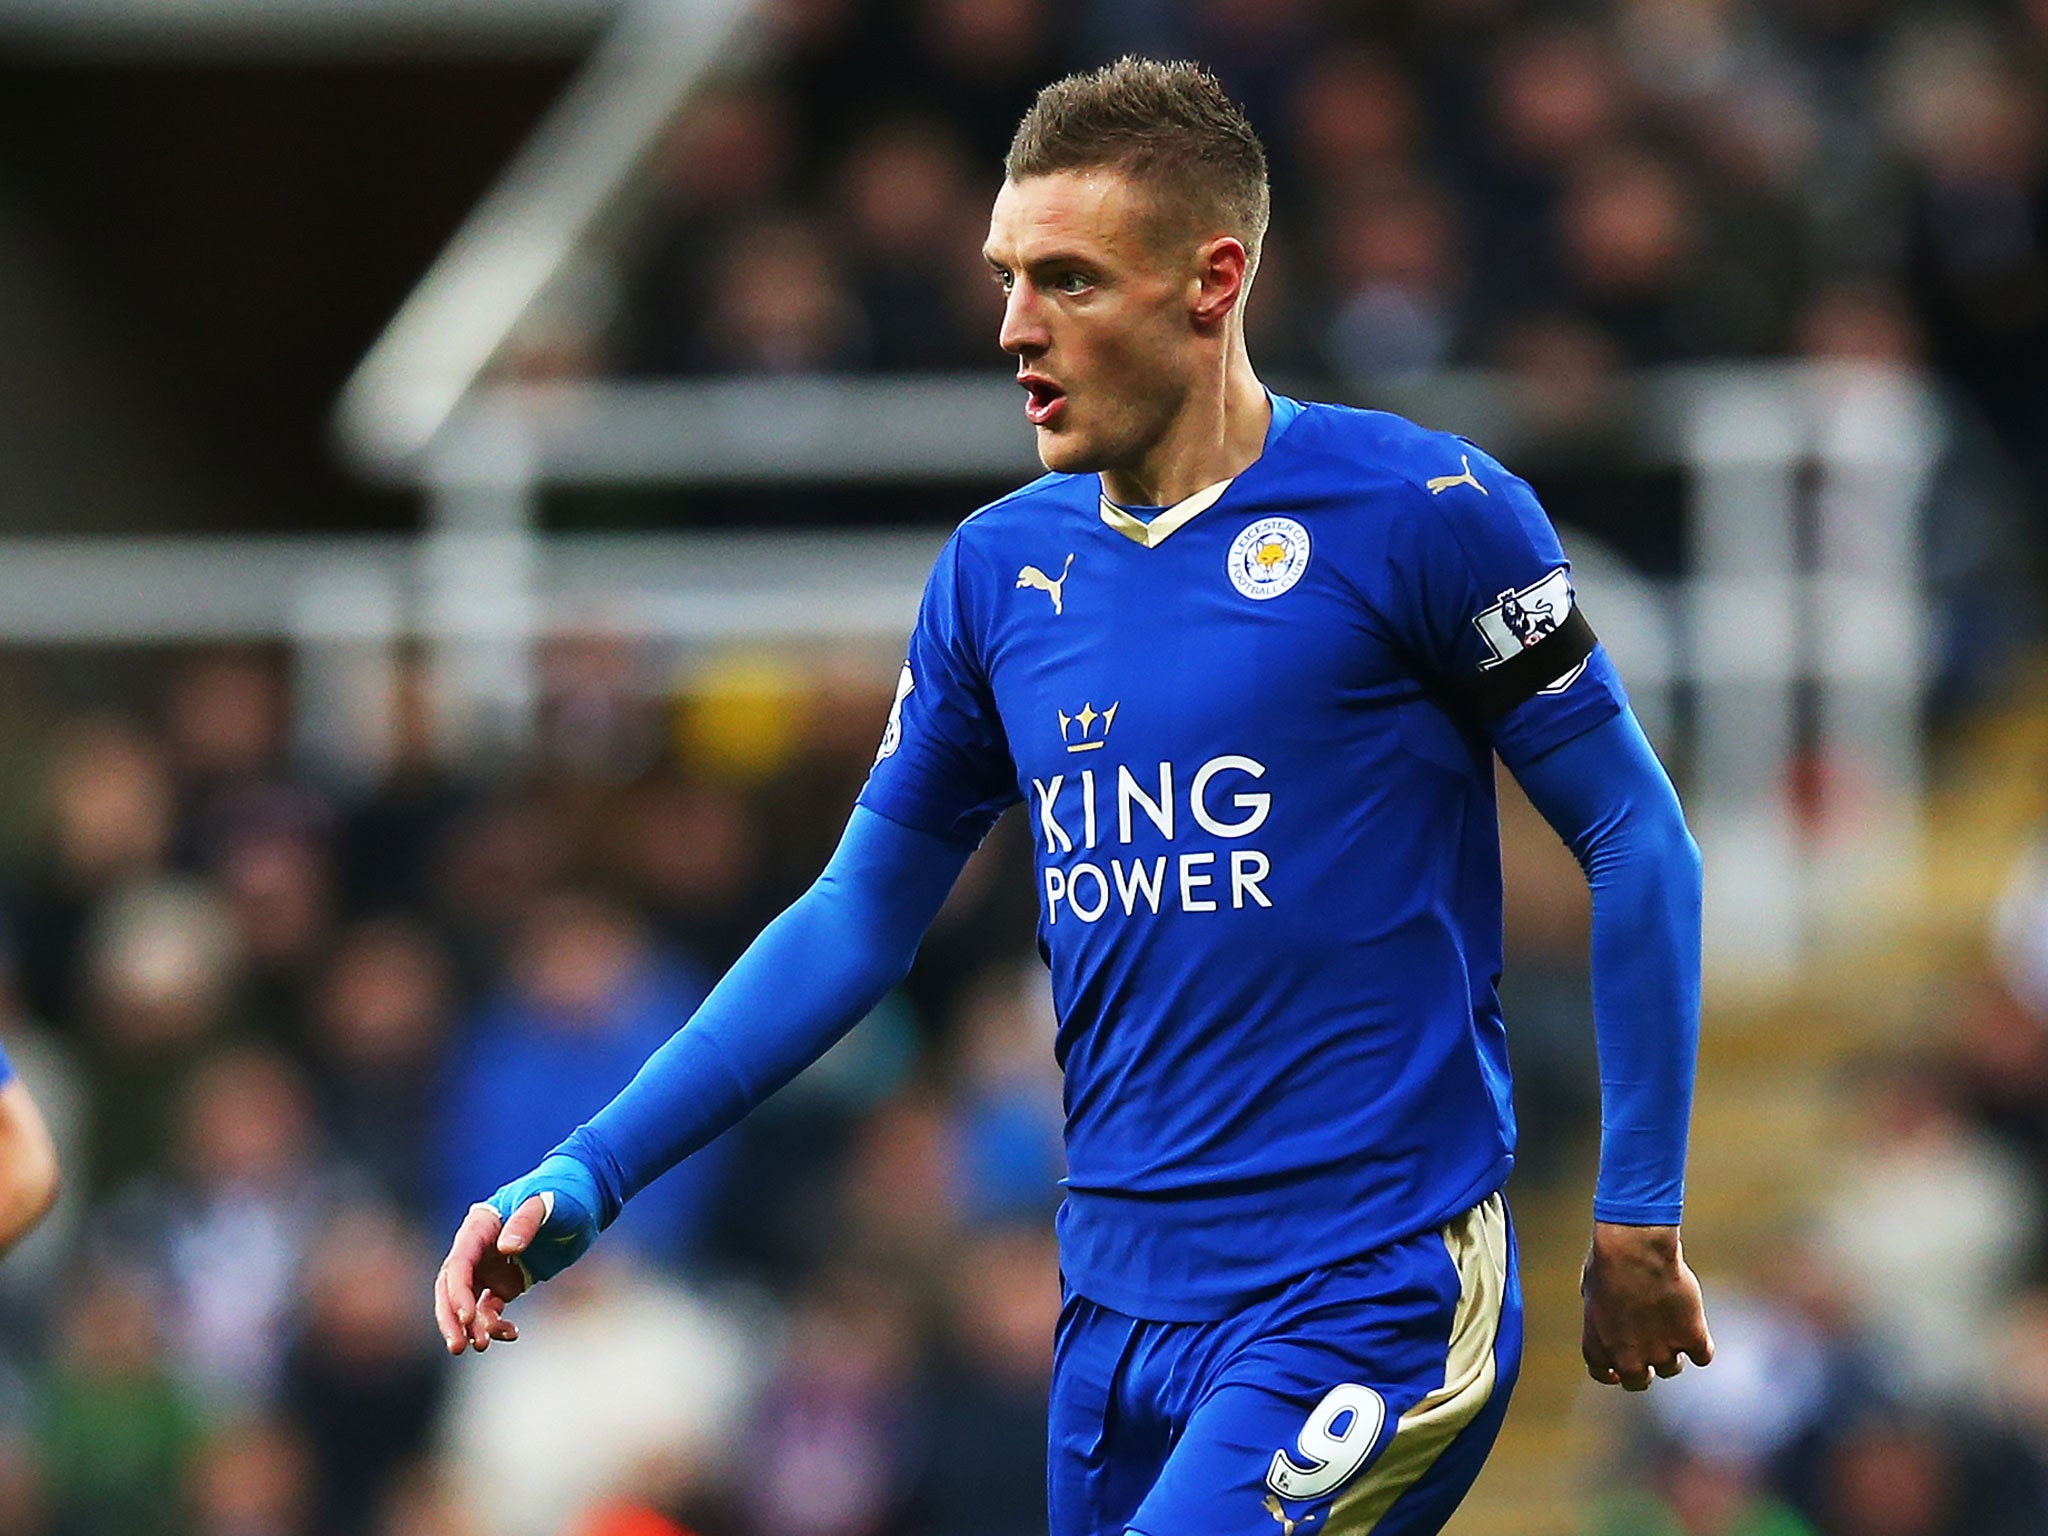 Jamie Vardy scored in his tenth consecutive Premier League outing for Leicester